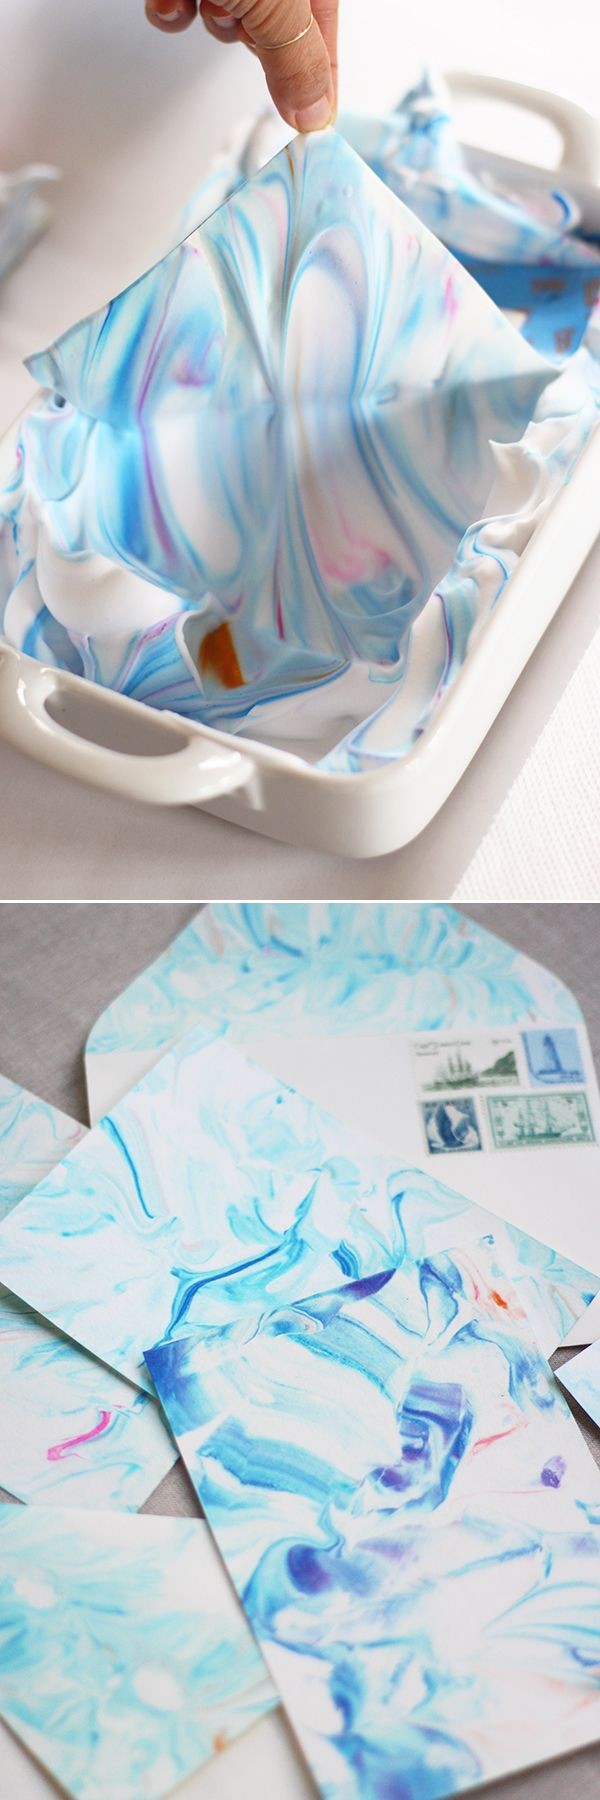 marbling with shaving cream and food dye